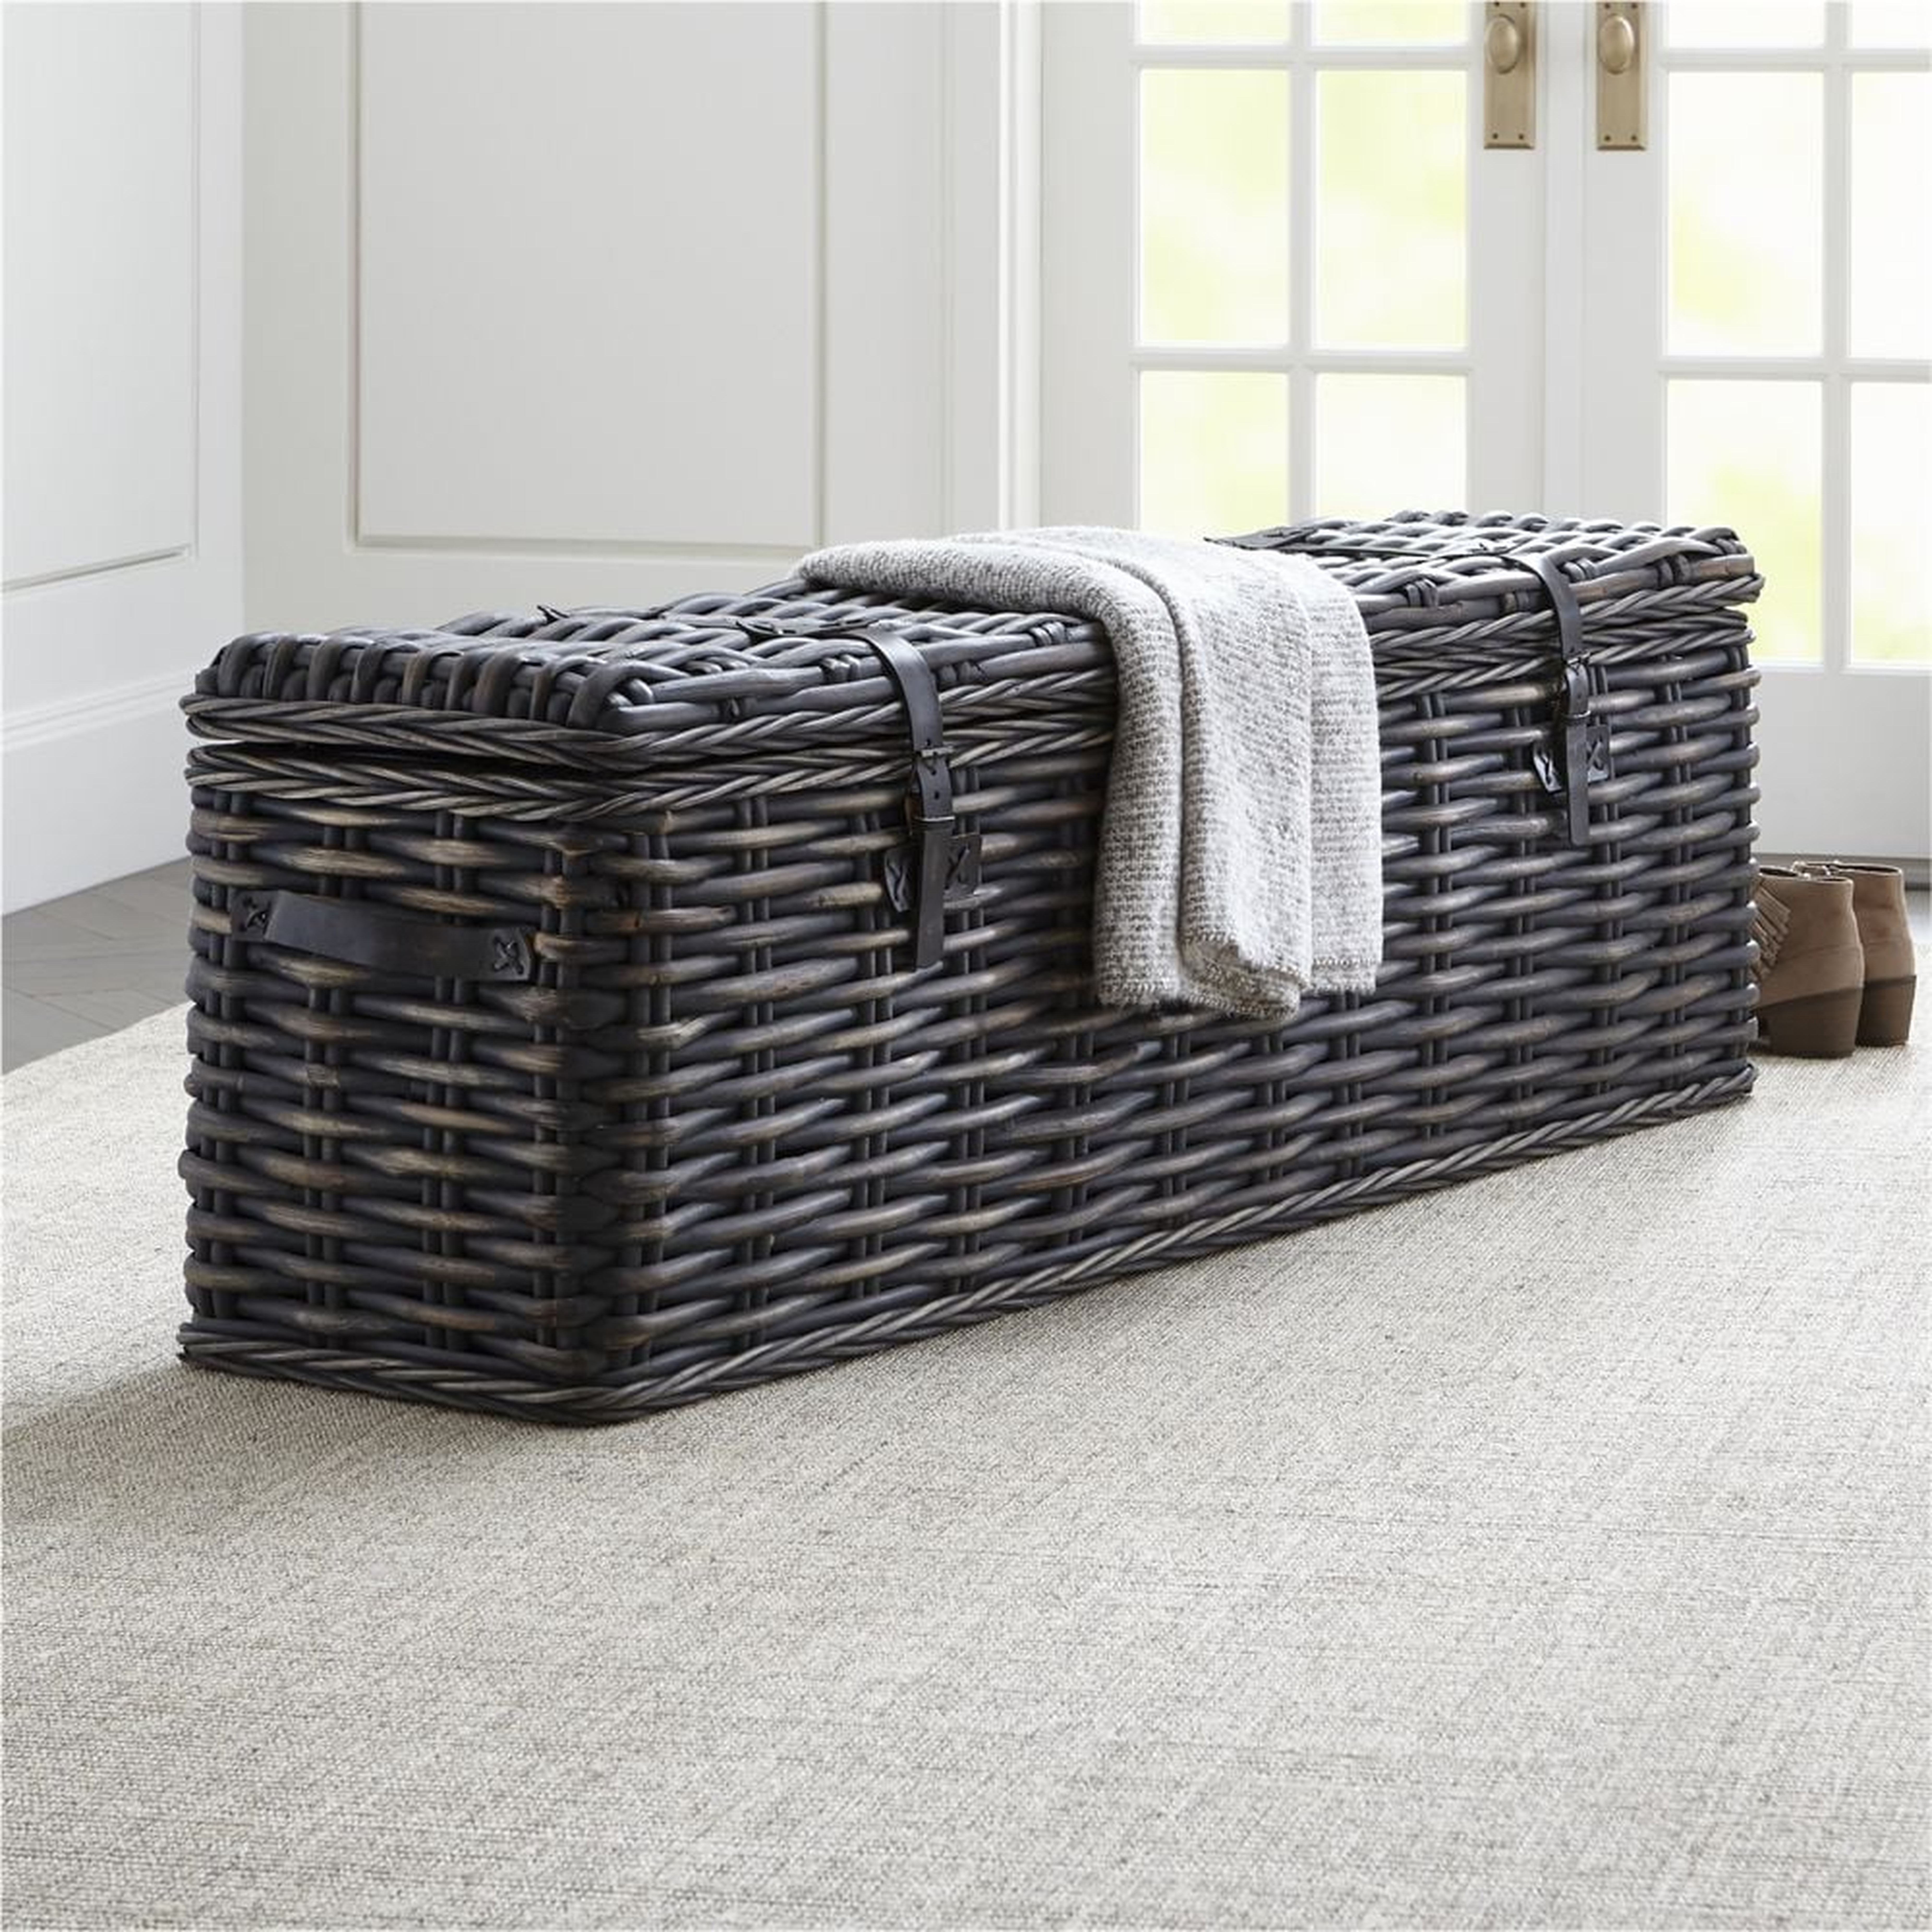 Jacoby Bedroom Trunk - Crate and Barrel